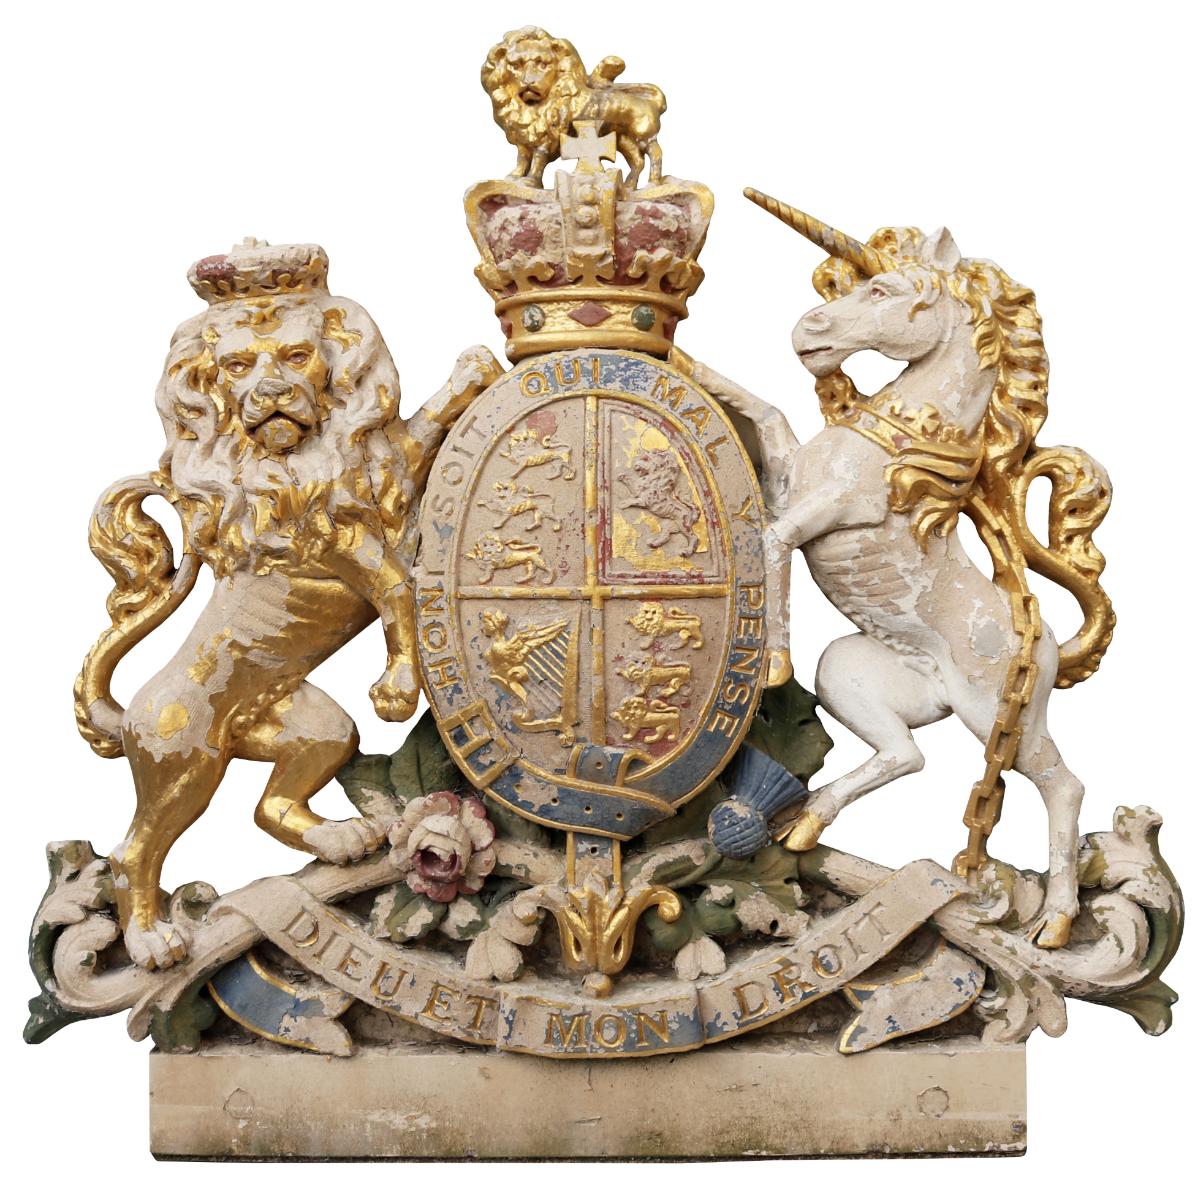 This very large scale antique stone crest features the Royal Coat of Arms for the City of Bath, where it was originally fitted to a local authority building.

Motto of British monarchs; Dieu et mon droit (‘God and my right hand’ )
Motto of the Order